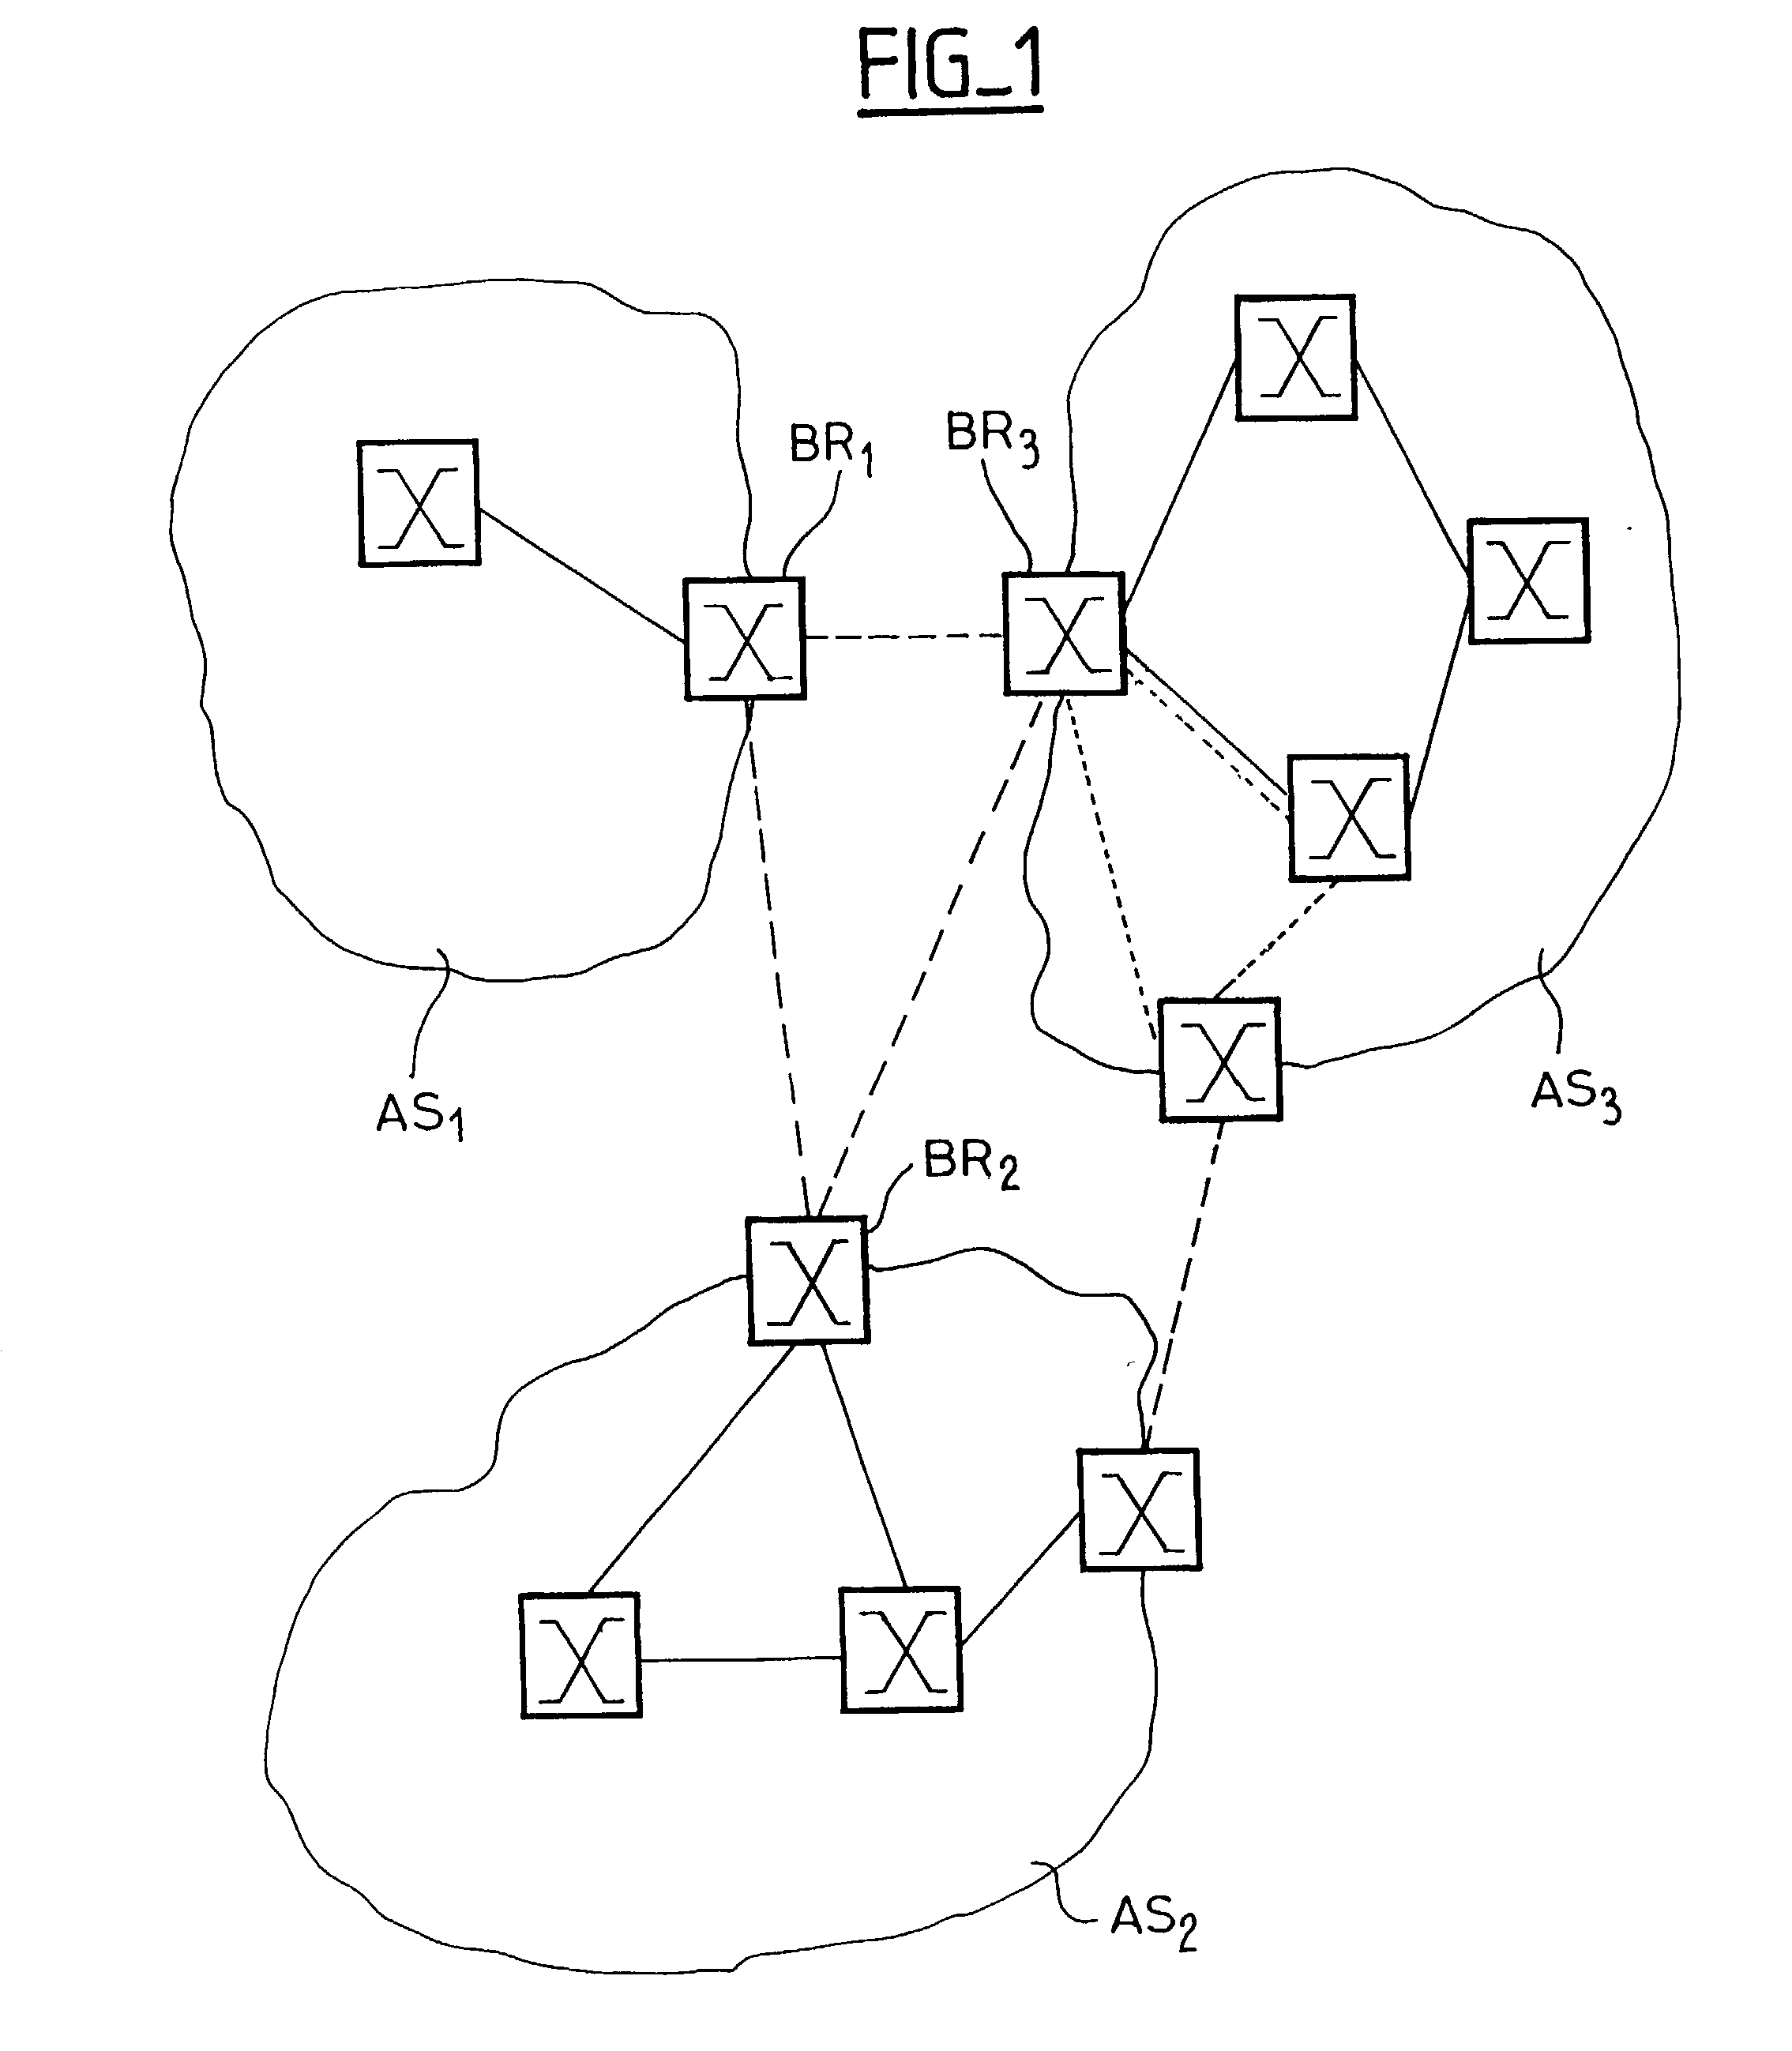 Fault-tolerant system for routing between autonomous systems